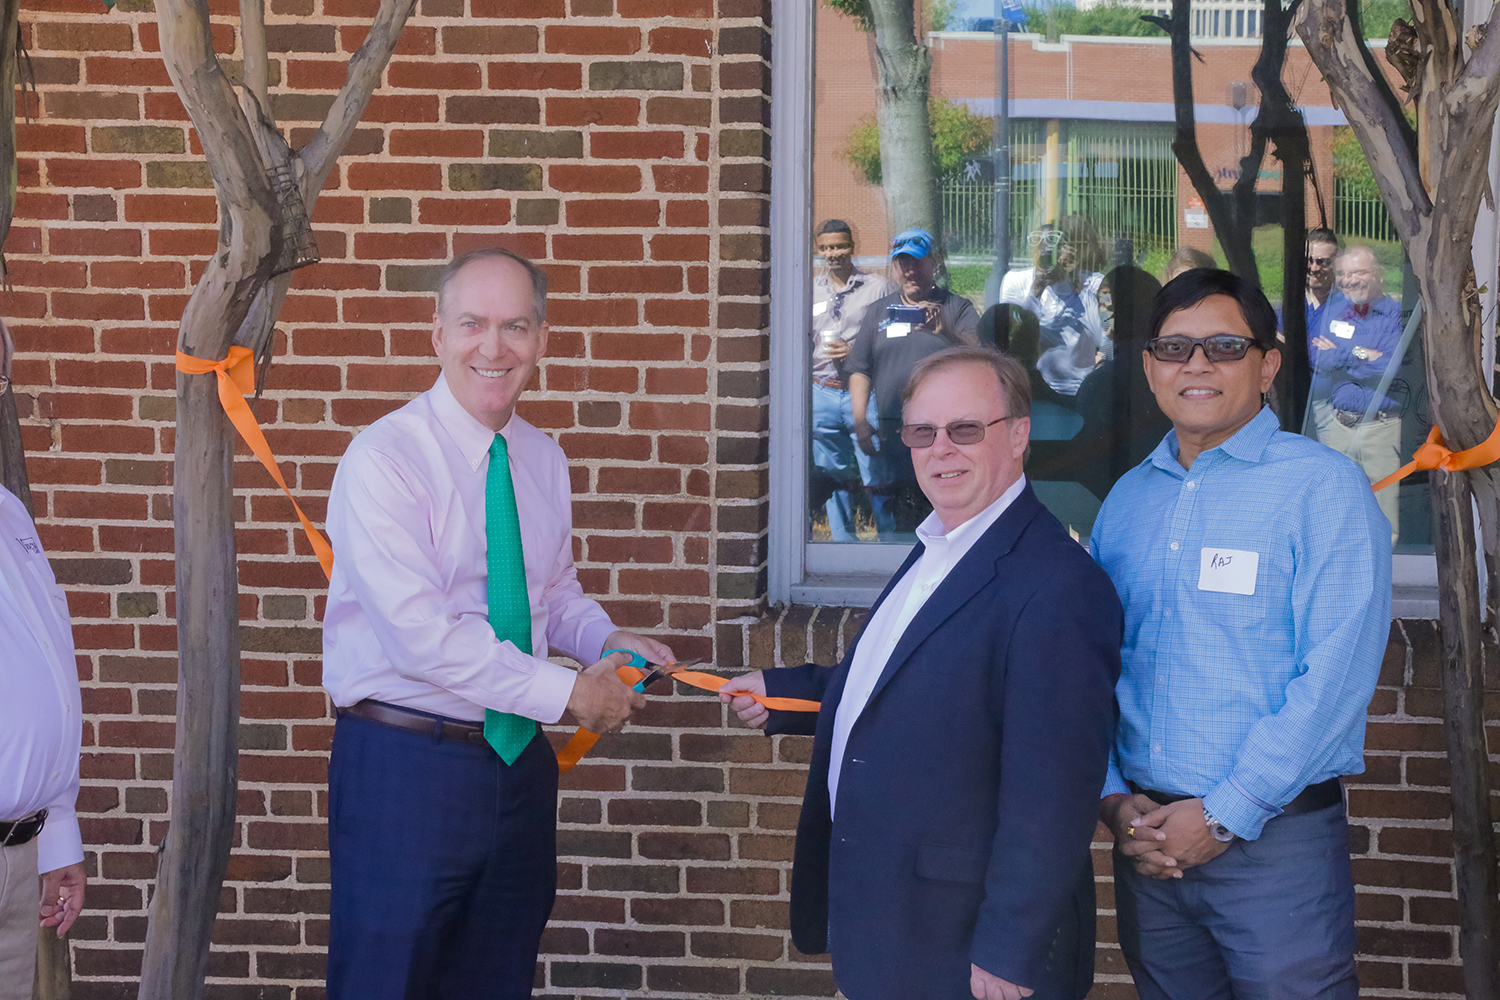 PivotSC Launches New Office Space in Greenville